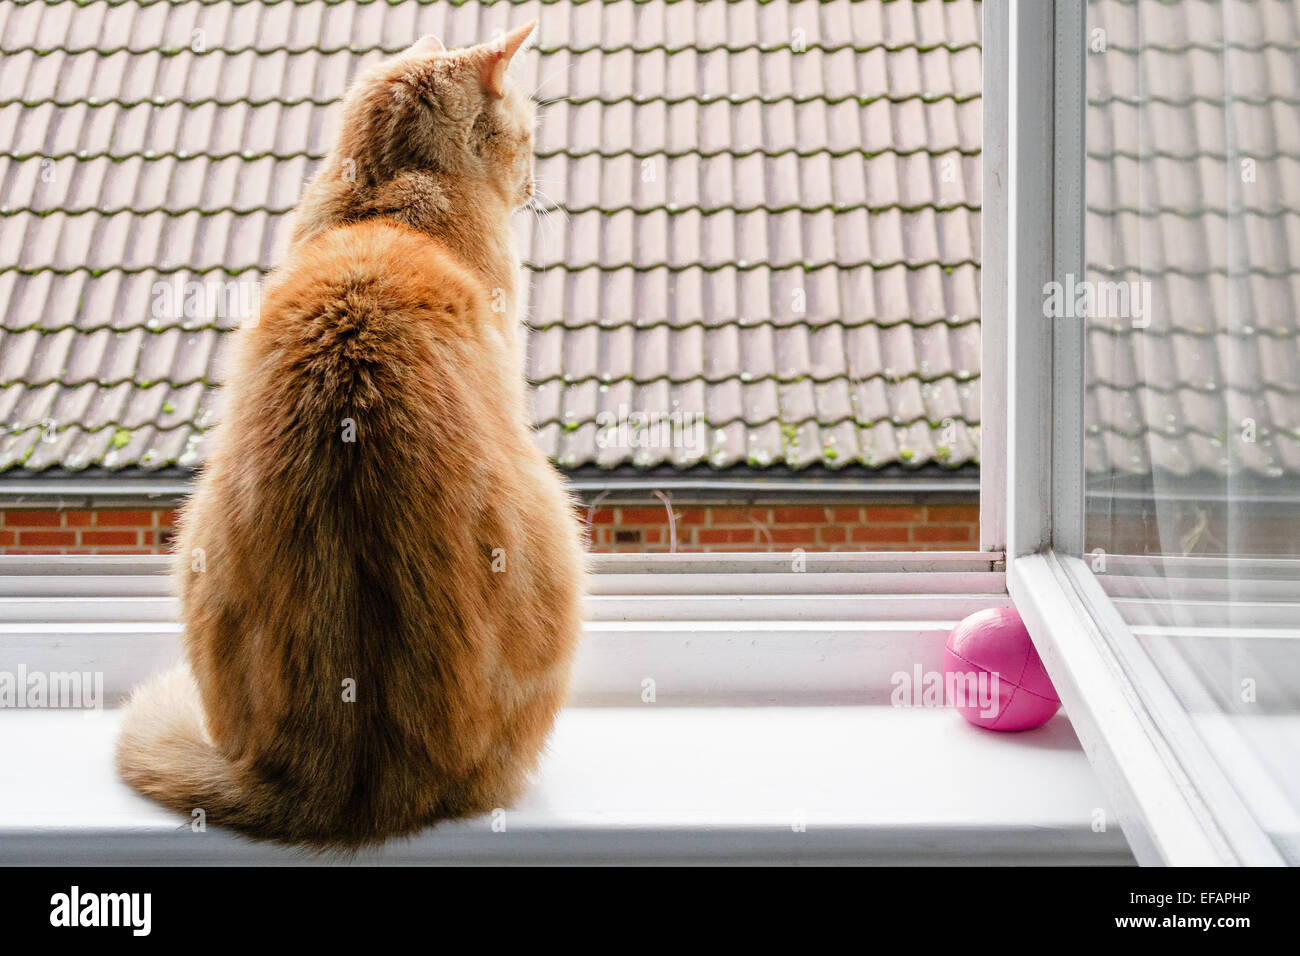 A cat looking out of a window, photo: January 04, 2015. Stock Photo